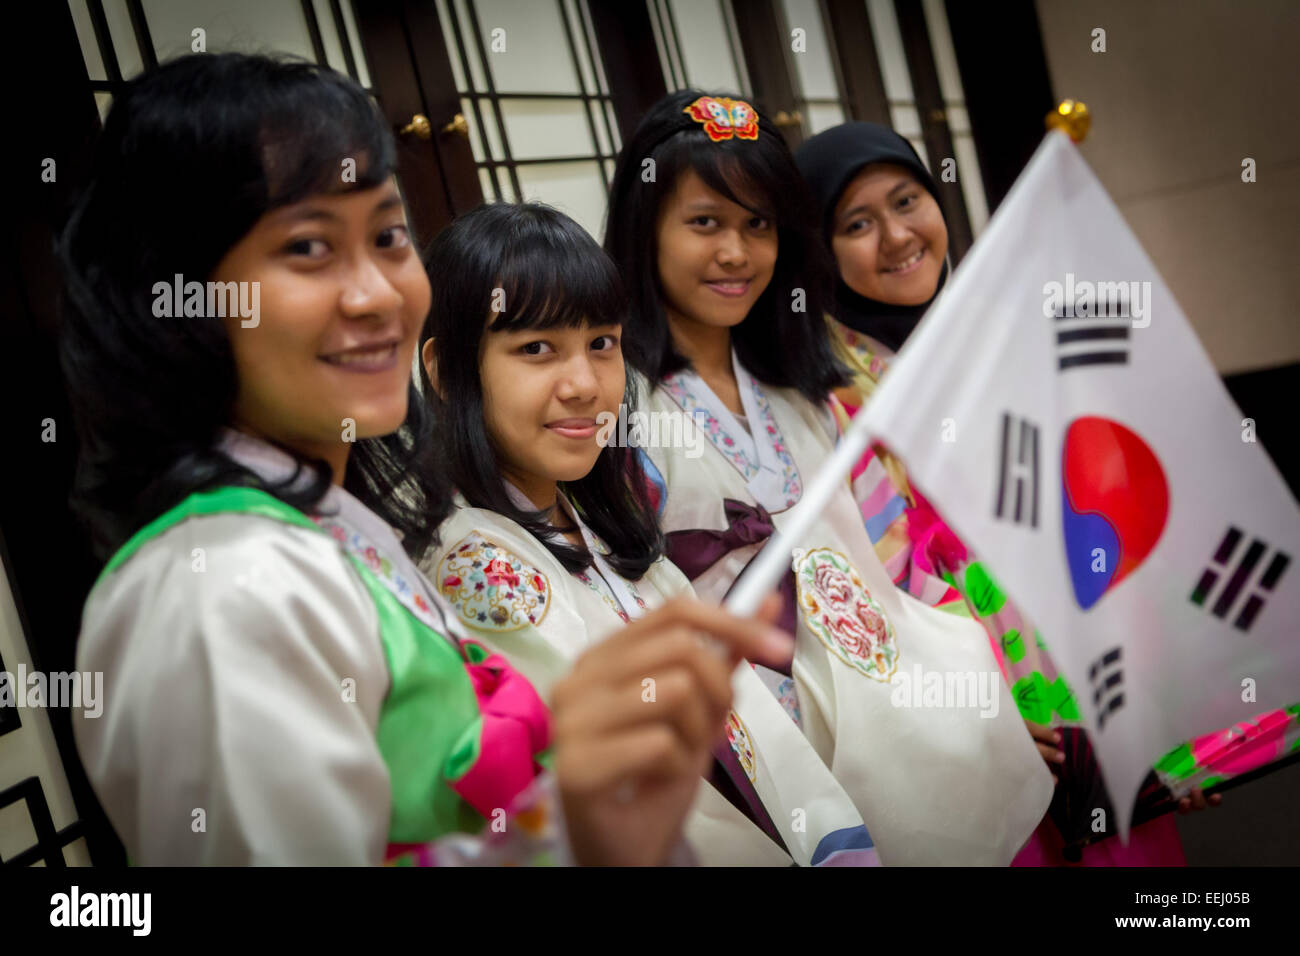 Portrait of Indonesian university students wearing Korean dress and holding South Korea flags at Korea Cultural Centre in Jakarta, Indonesia. Stock Photo